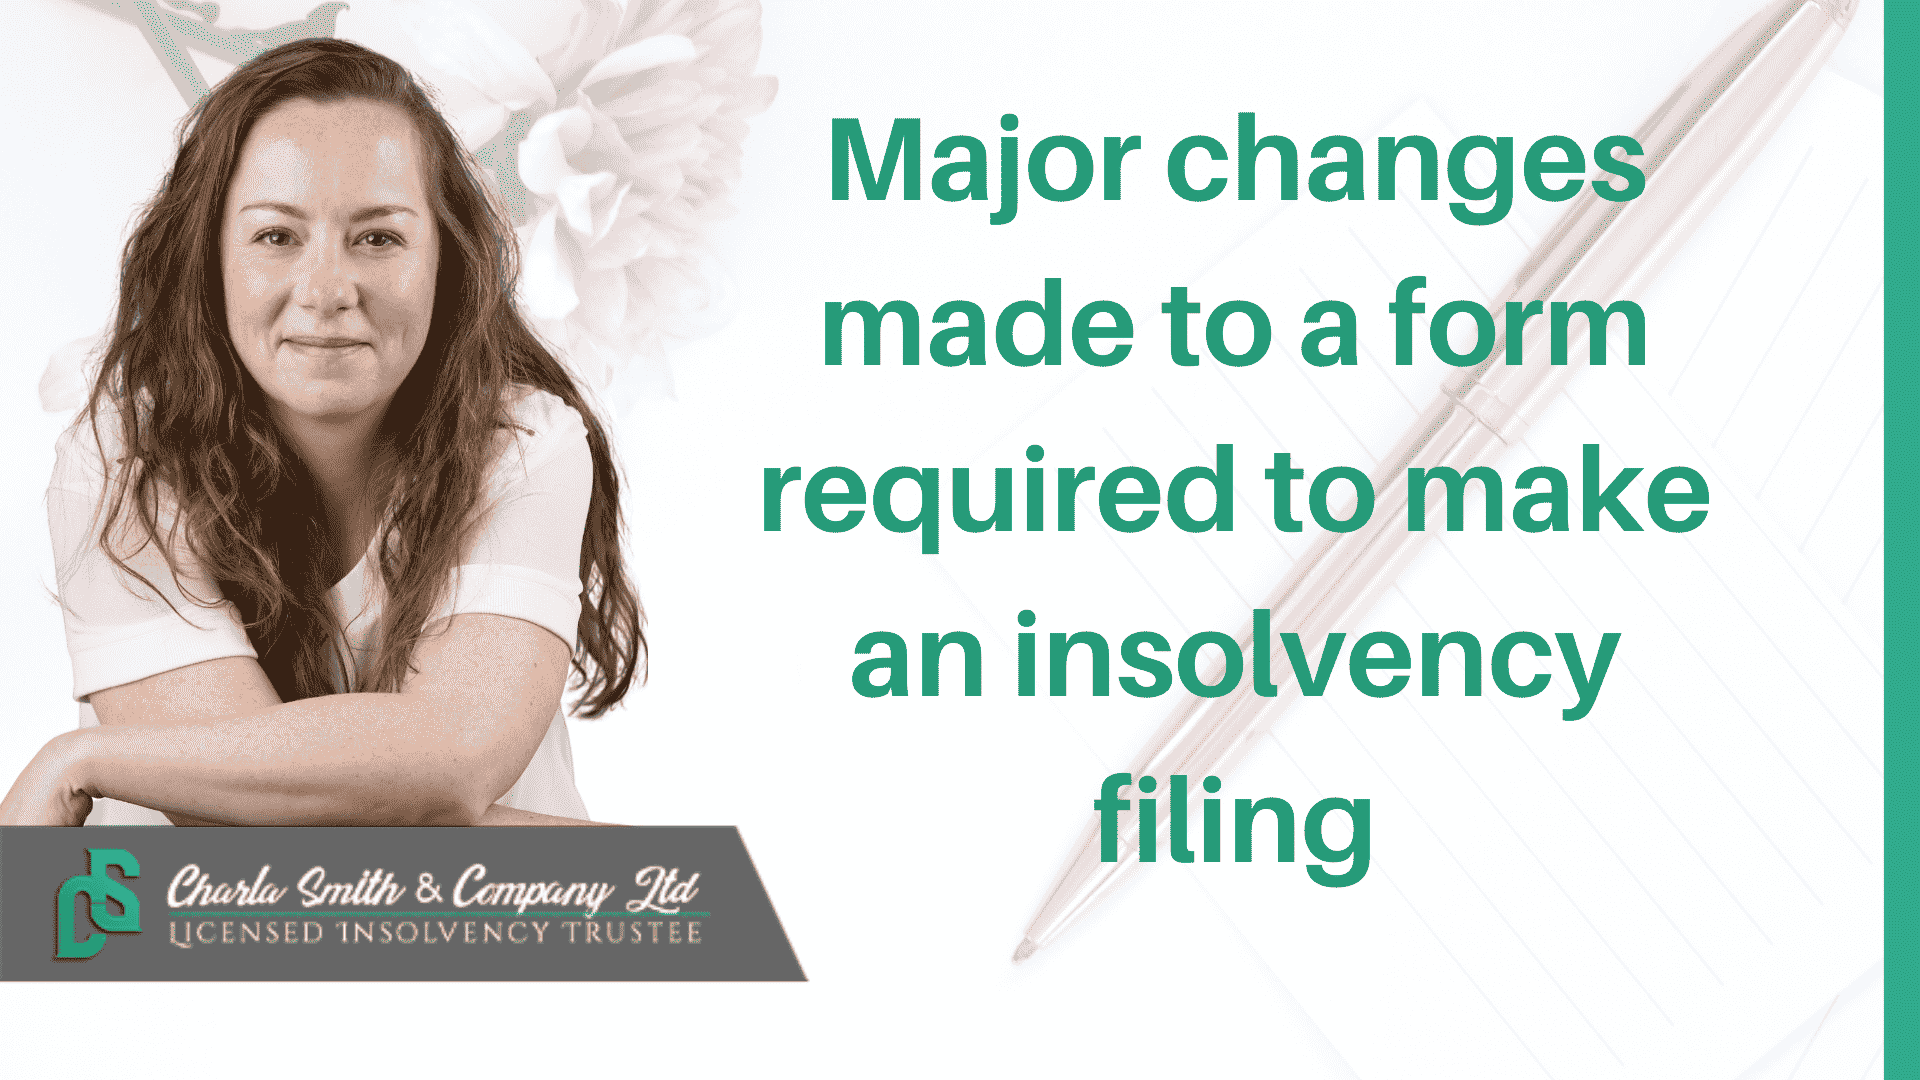 Major changes made to a form required to make an insolvency filing